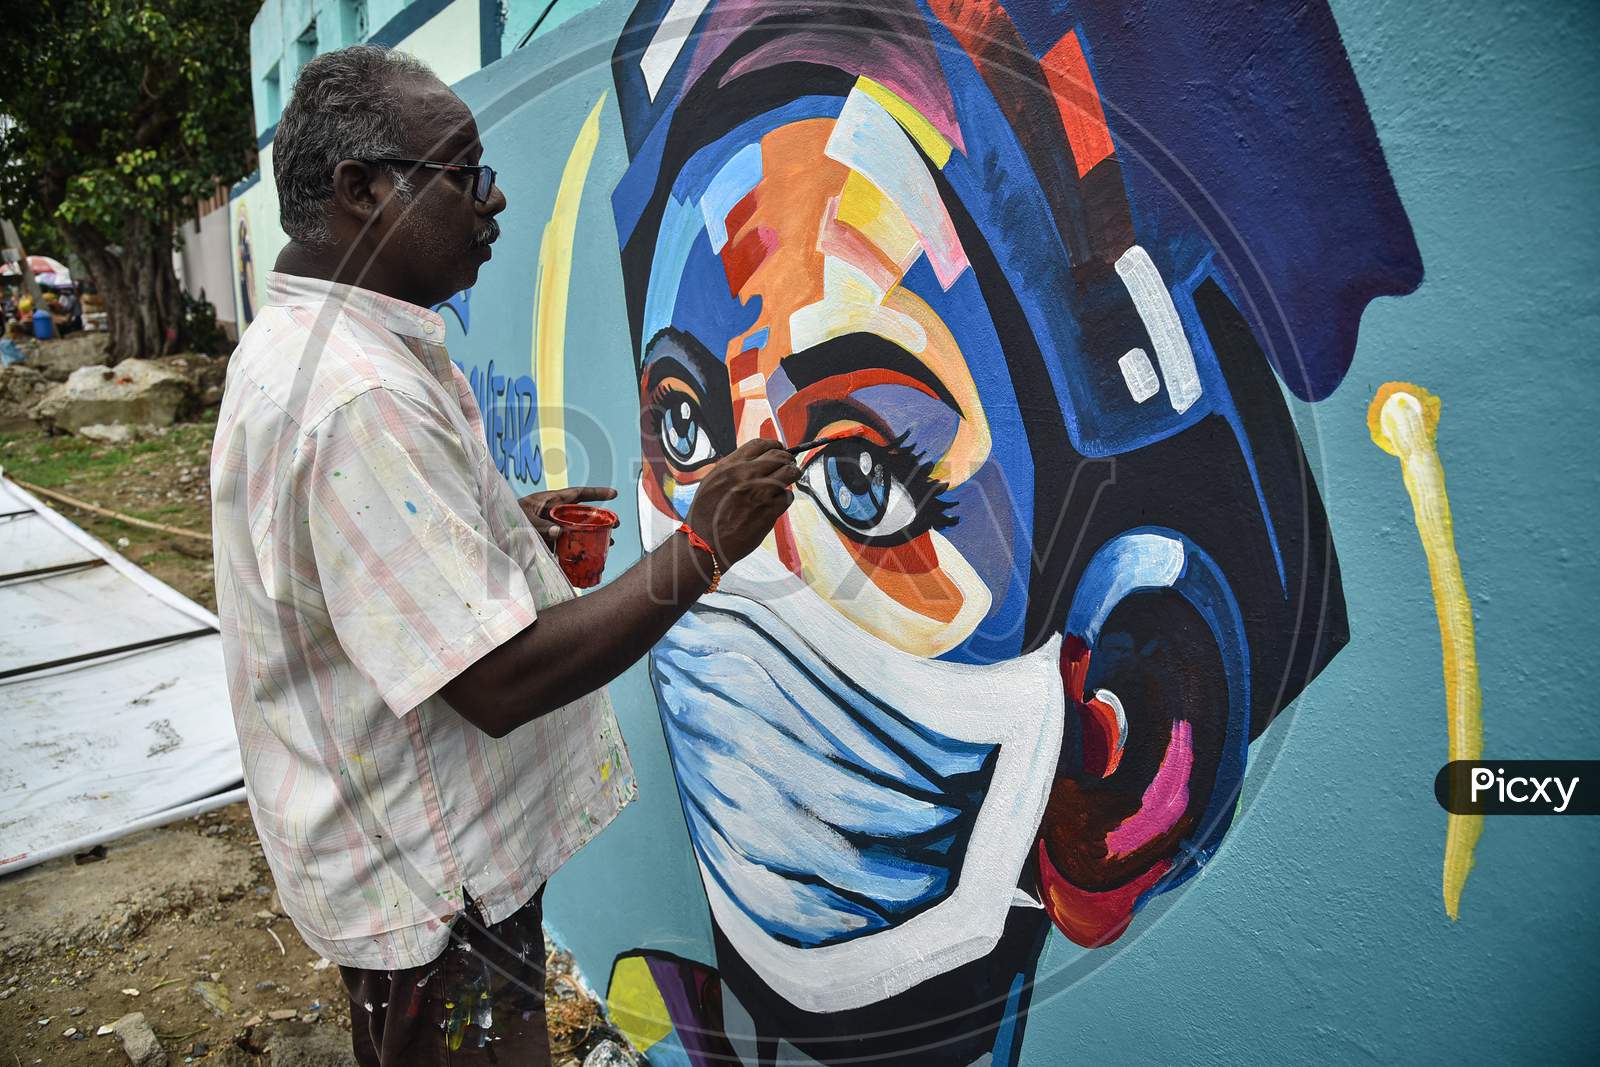 An Artist Paints A Mural On A Wall To Create Awareness On Wearing A Face Mask To Prevent The Spread Of Coronavirus, In Vijayawada, August 05, 2020.